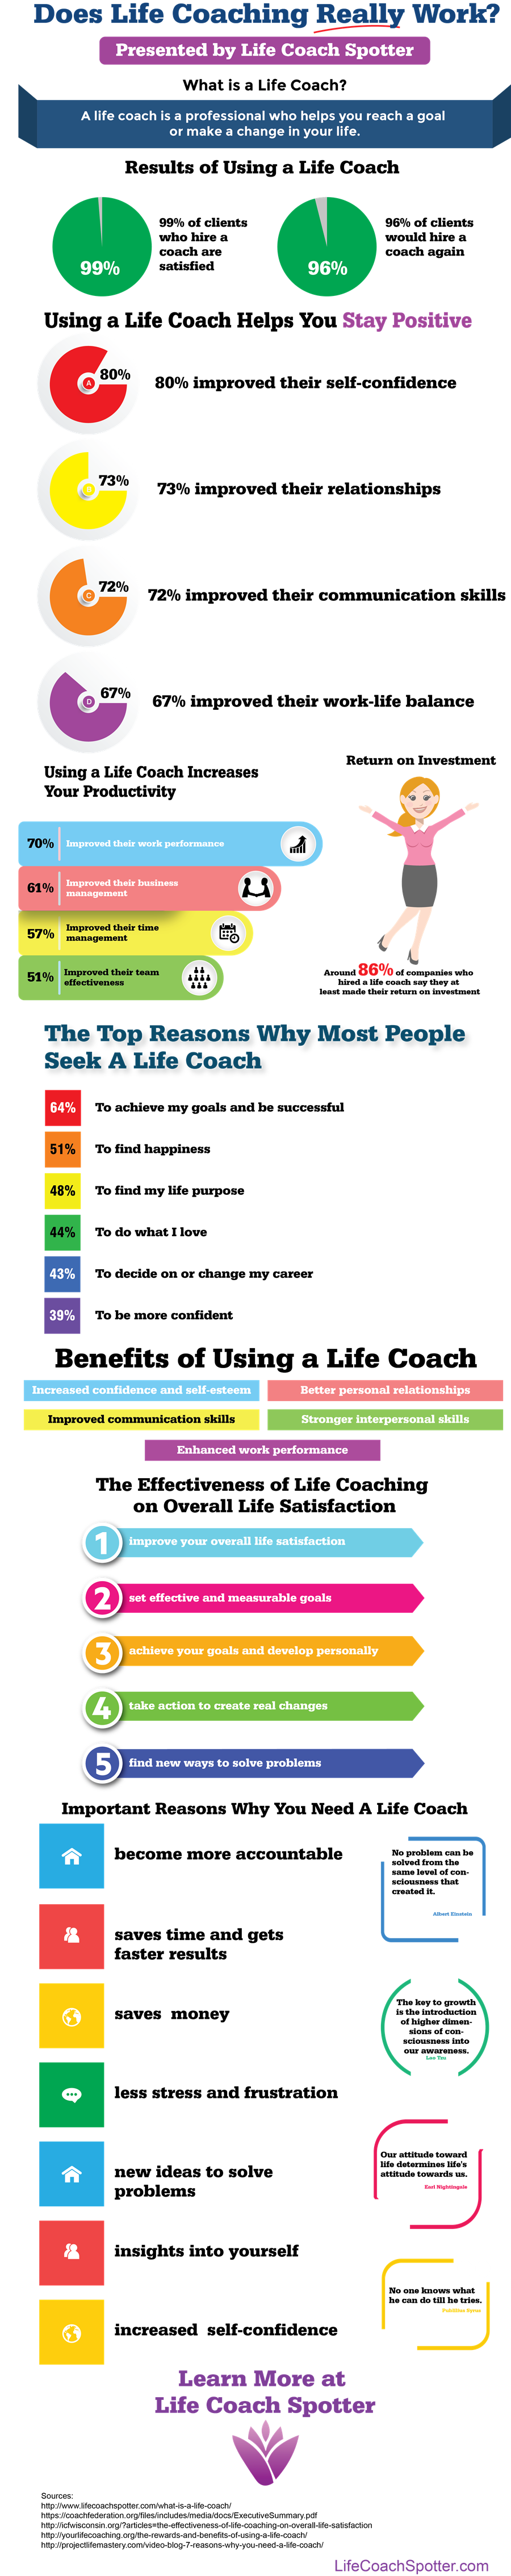 Does-Life-Coaching-Really-Work-Tom-Casano-900